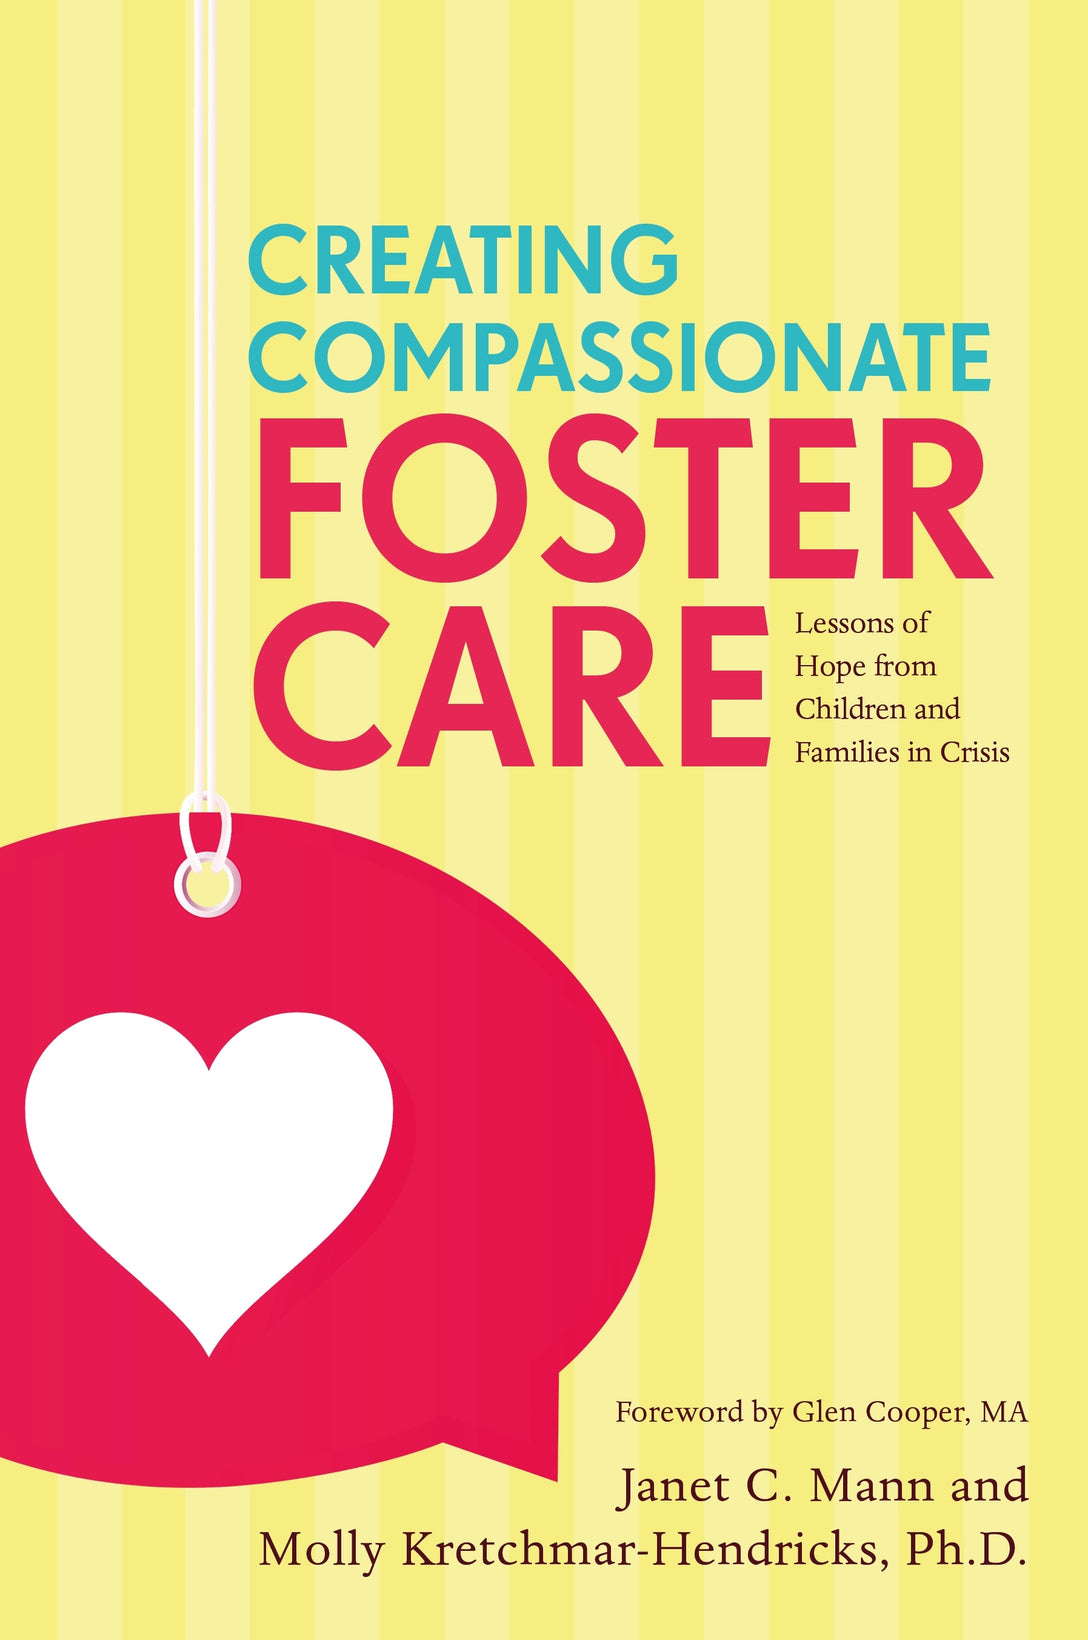 Creating Compassionate Foster Care by Janet Mann, Molly Kretchmar-Hendricks, Glen Cooper